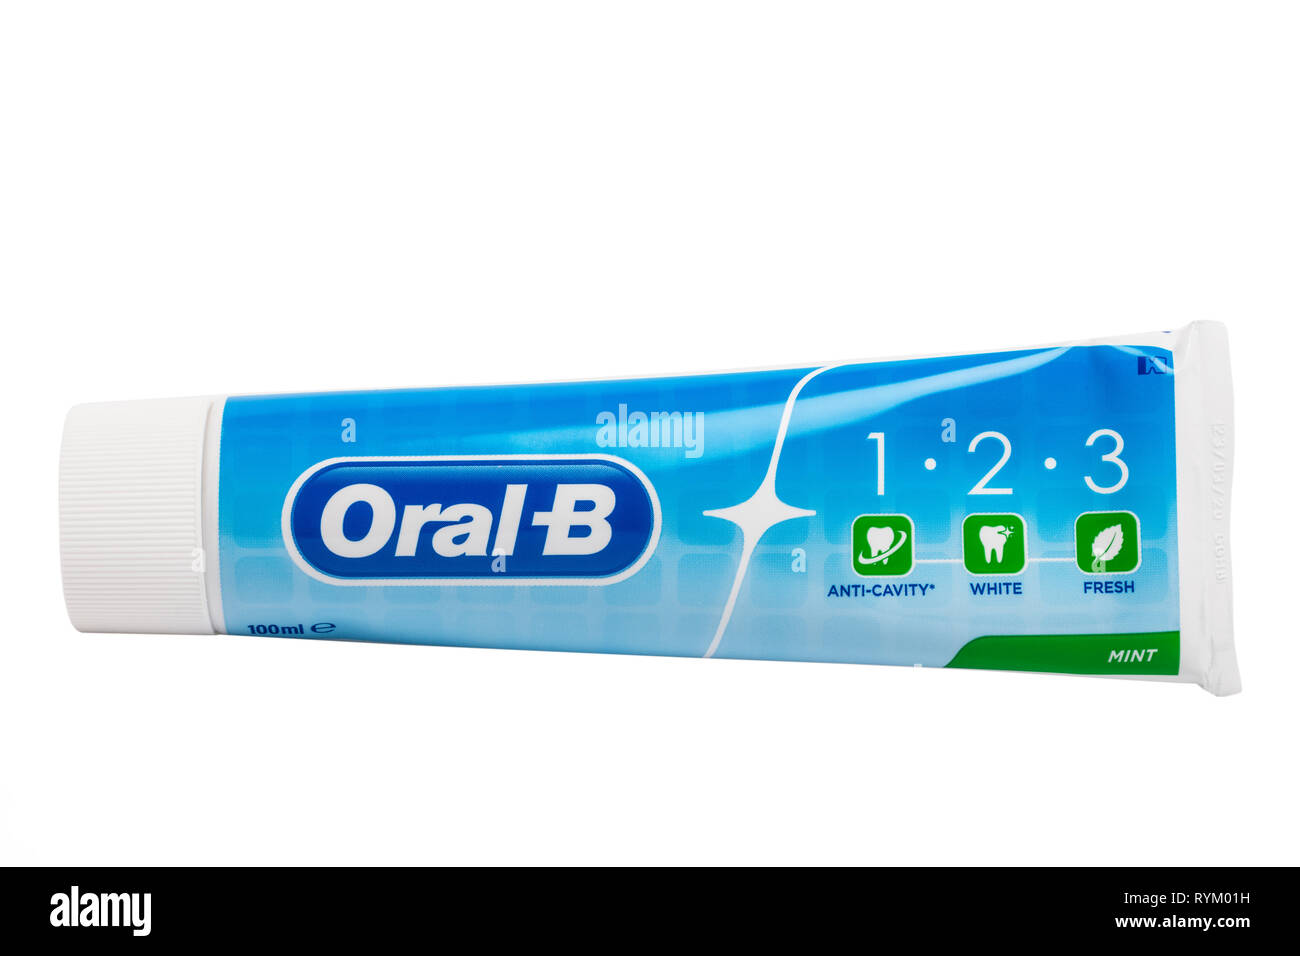 A tube of Oral-B mint toothpaste with active flouride on a white background Stock Photo